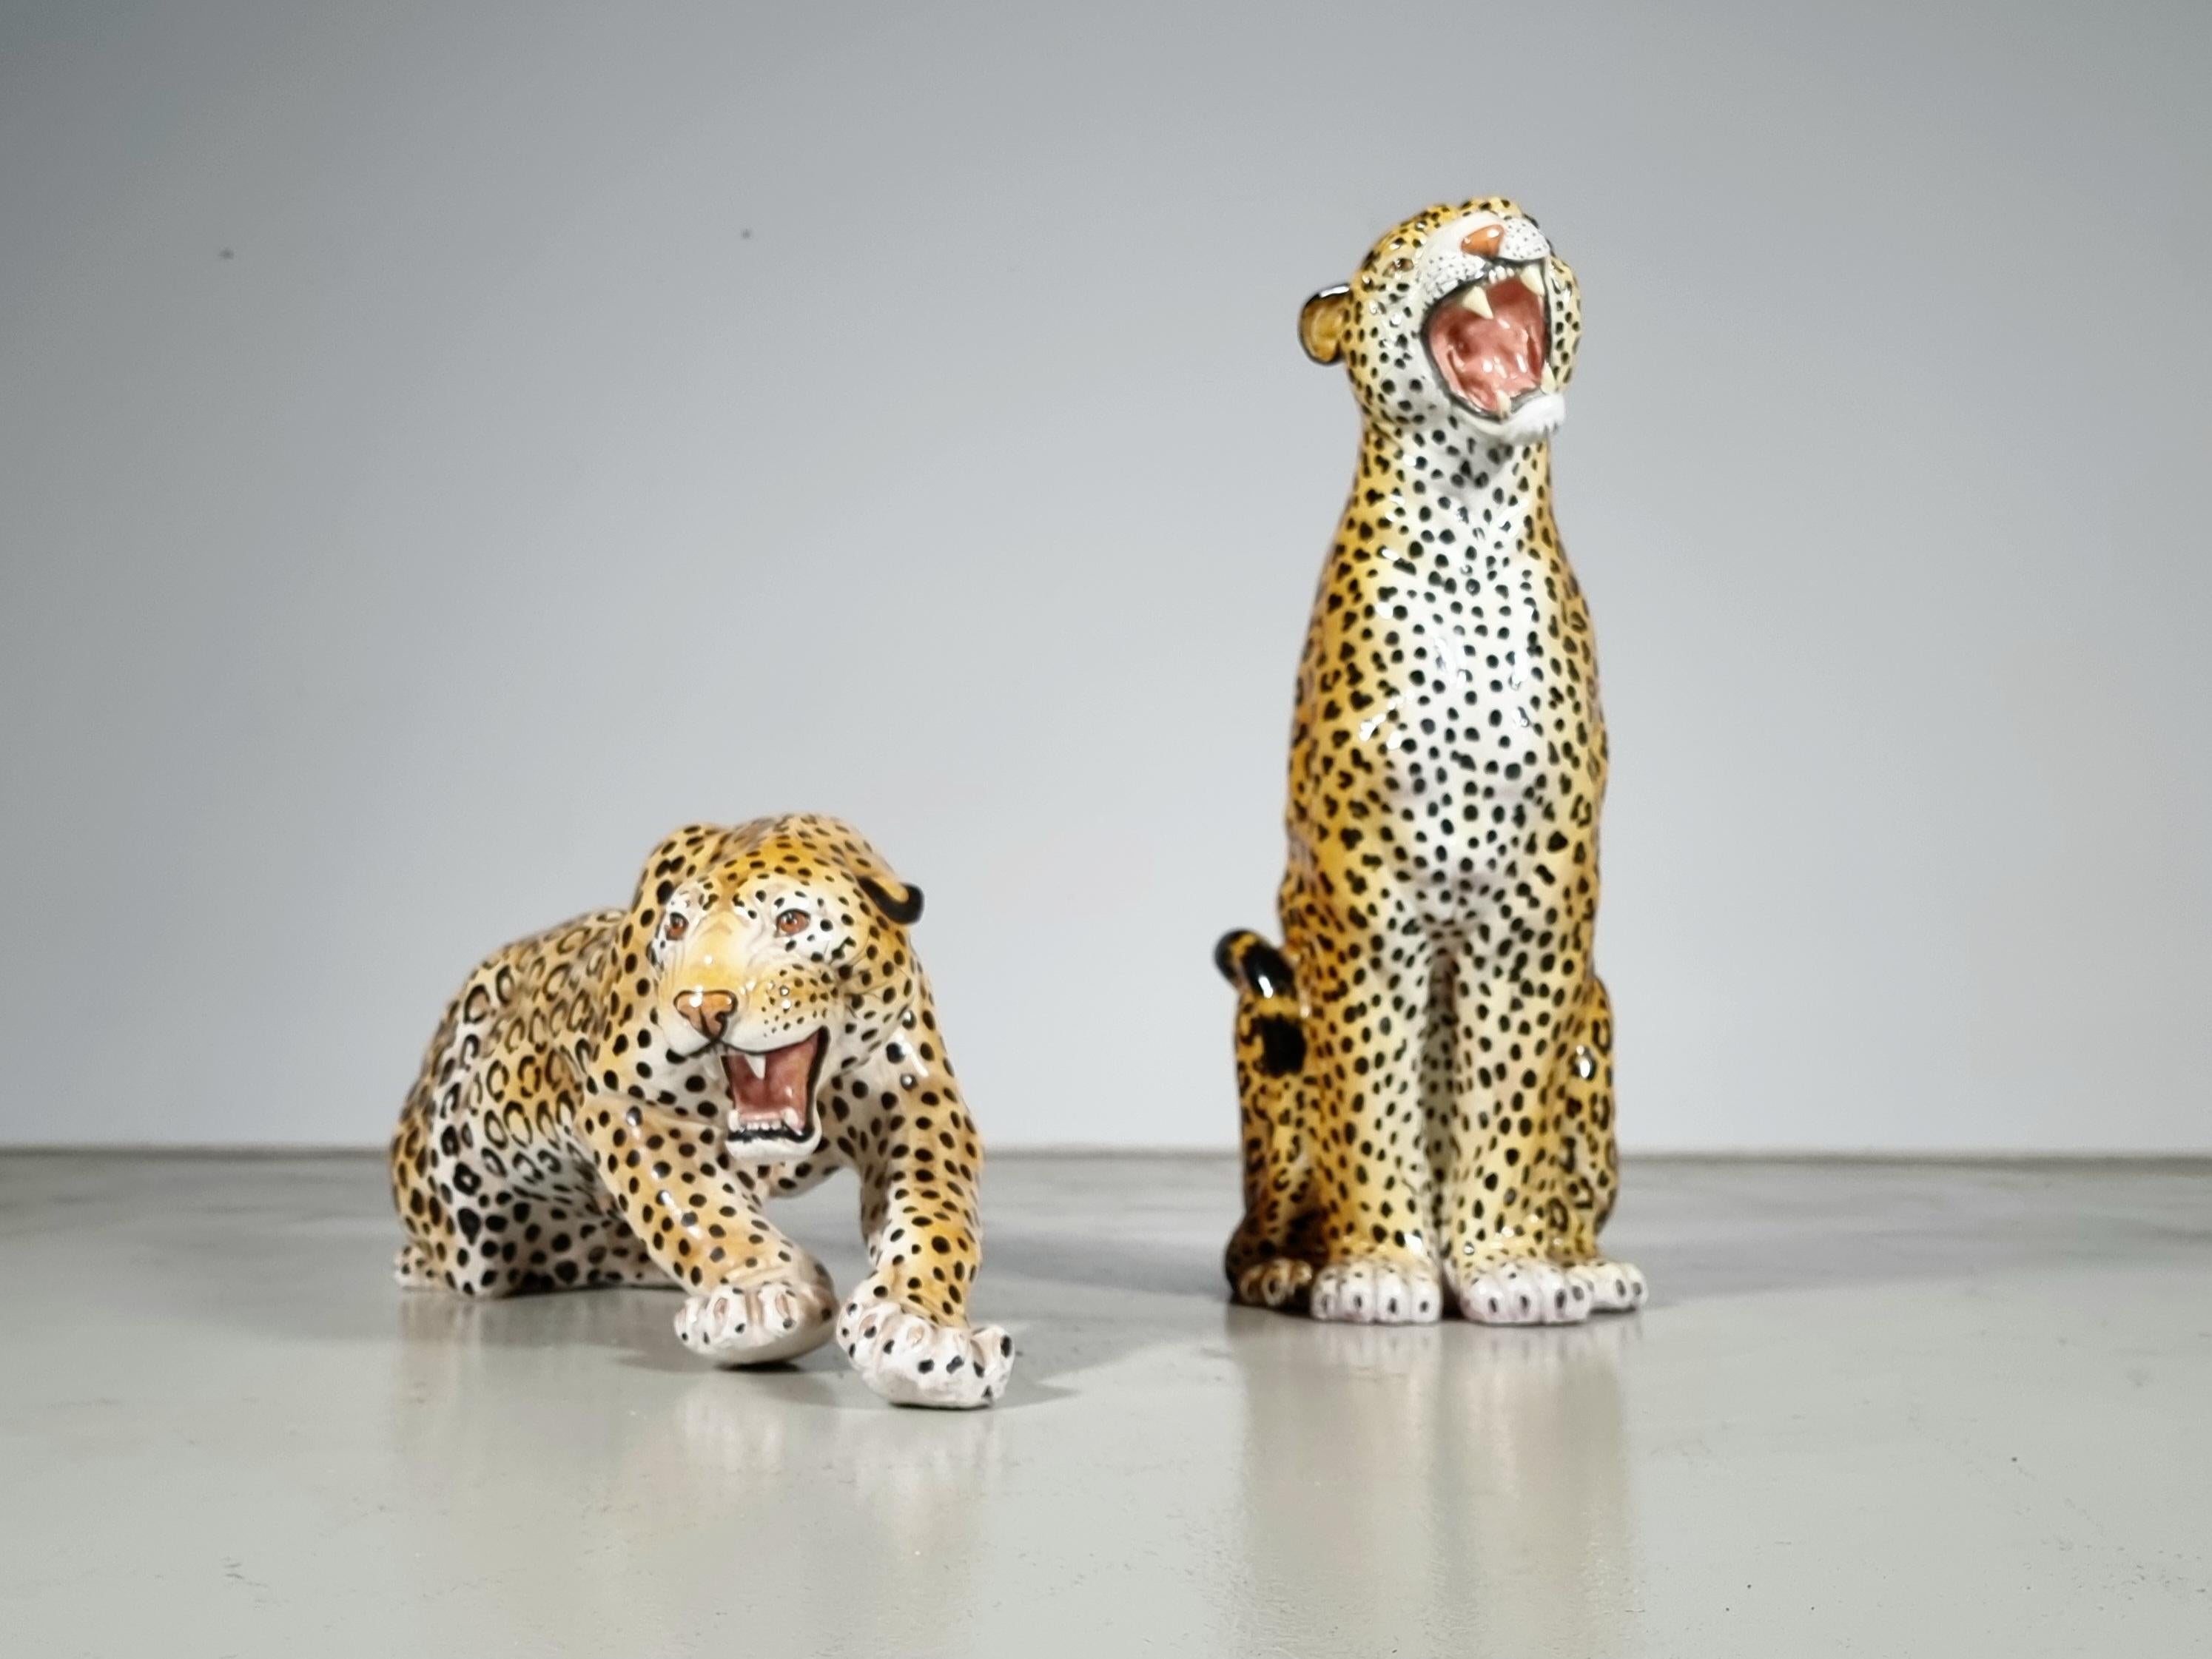 Unique pair of vintage very large hand-painted ceramic seated and lying leopard sculptures, Italy,  1960s,  Hollywood Regency style.

Very eclectic and decorative pieces that will make a statement.
Handmade in Italy, painted by hand, and then